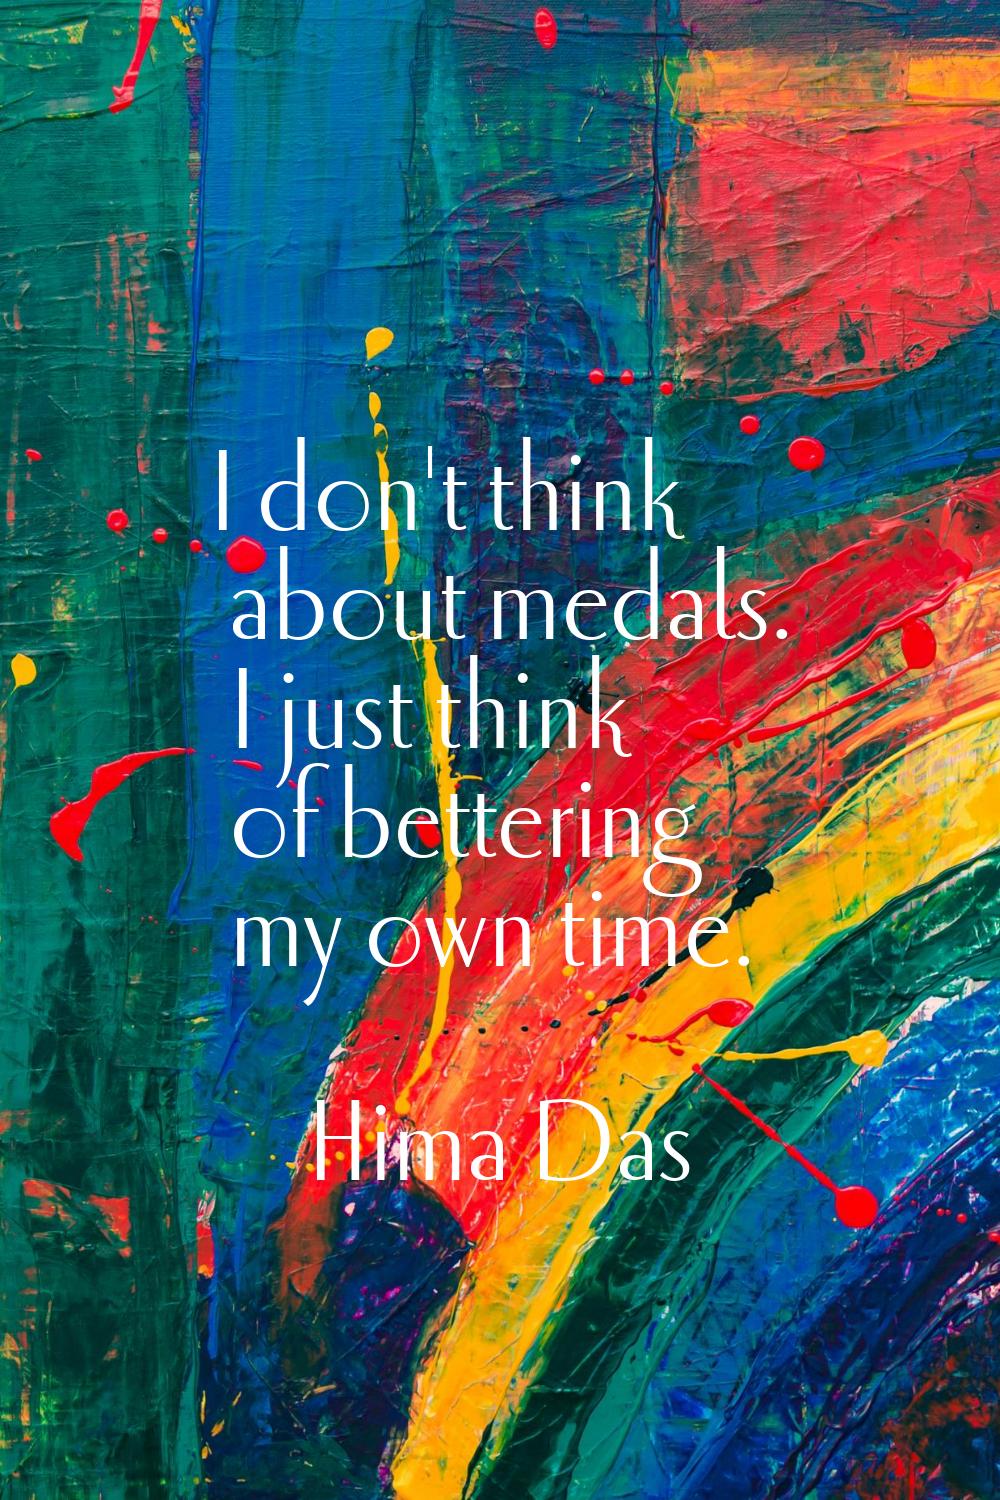 I don't think about medals. I just think of bettering my own time.